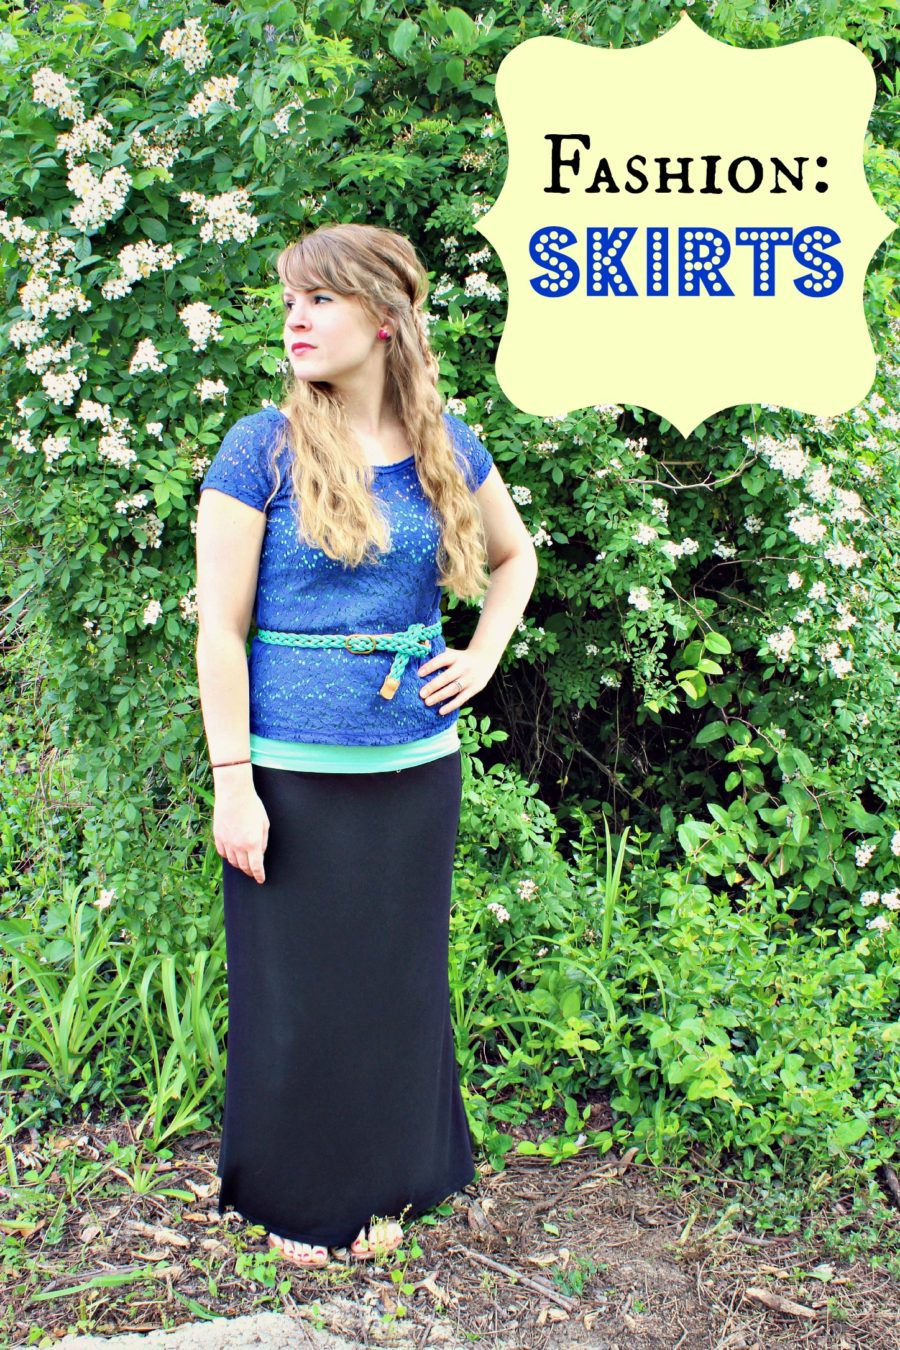 Fashion Trends: Skirts - A Blossoming Life